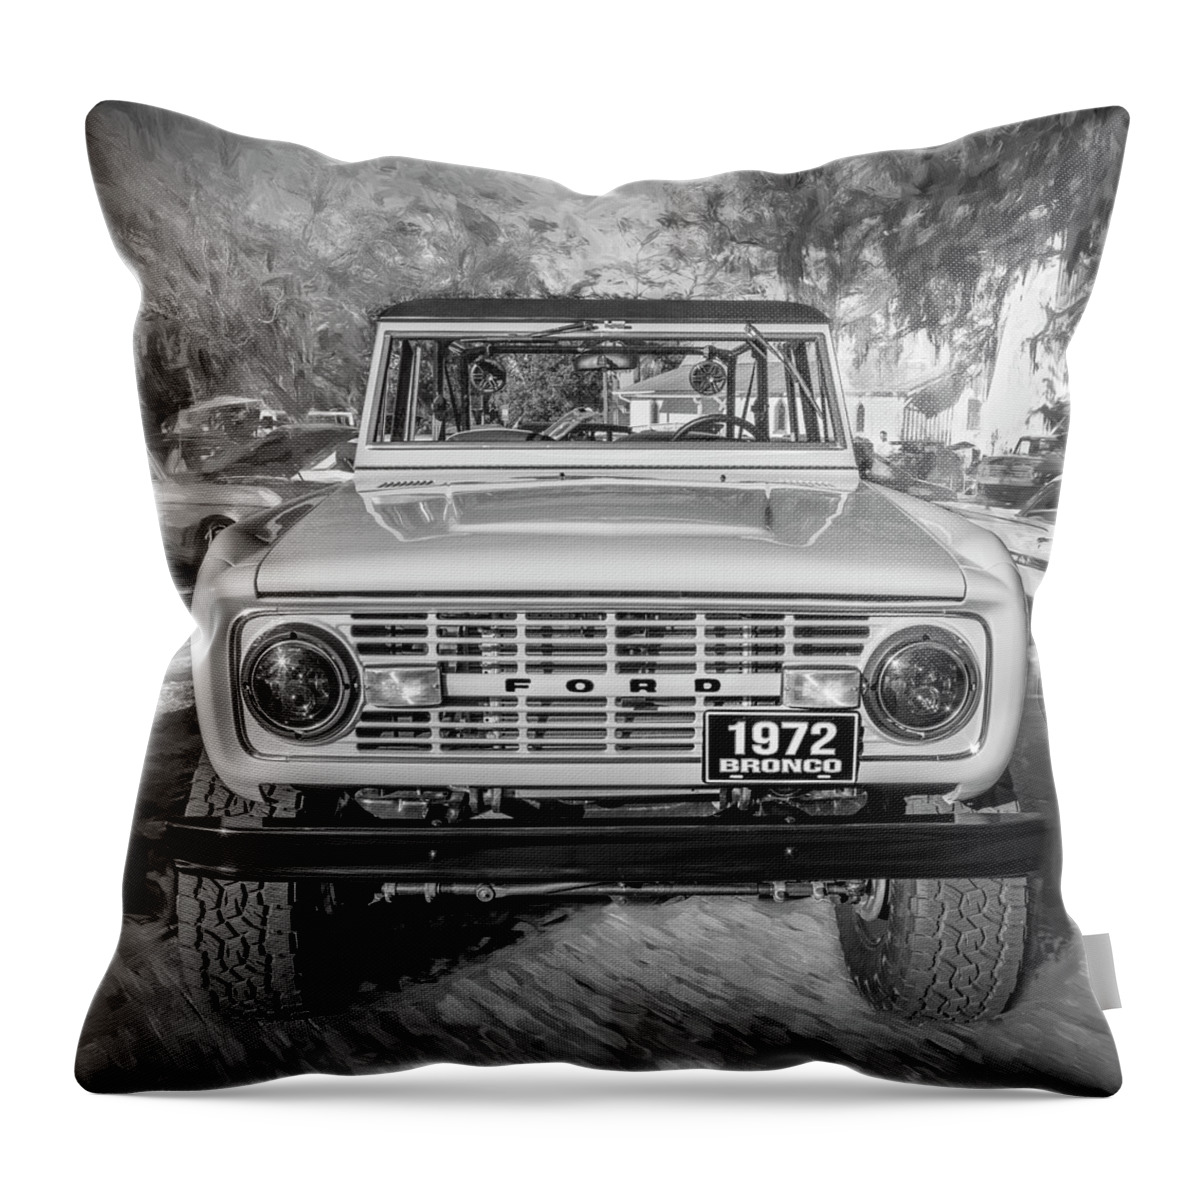 1972 Wind Blue Ford Bronco Throw Pillow featuring the photograph 1972 Wind Blue Ford Bronco X101 by Rich Franco